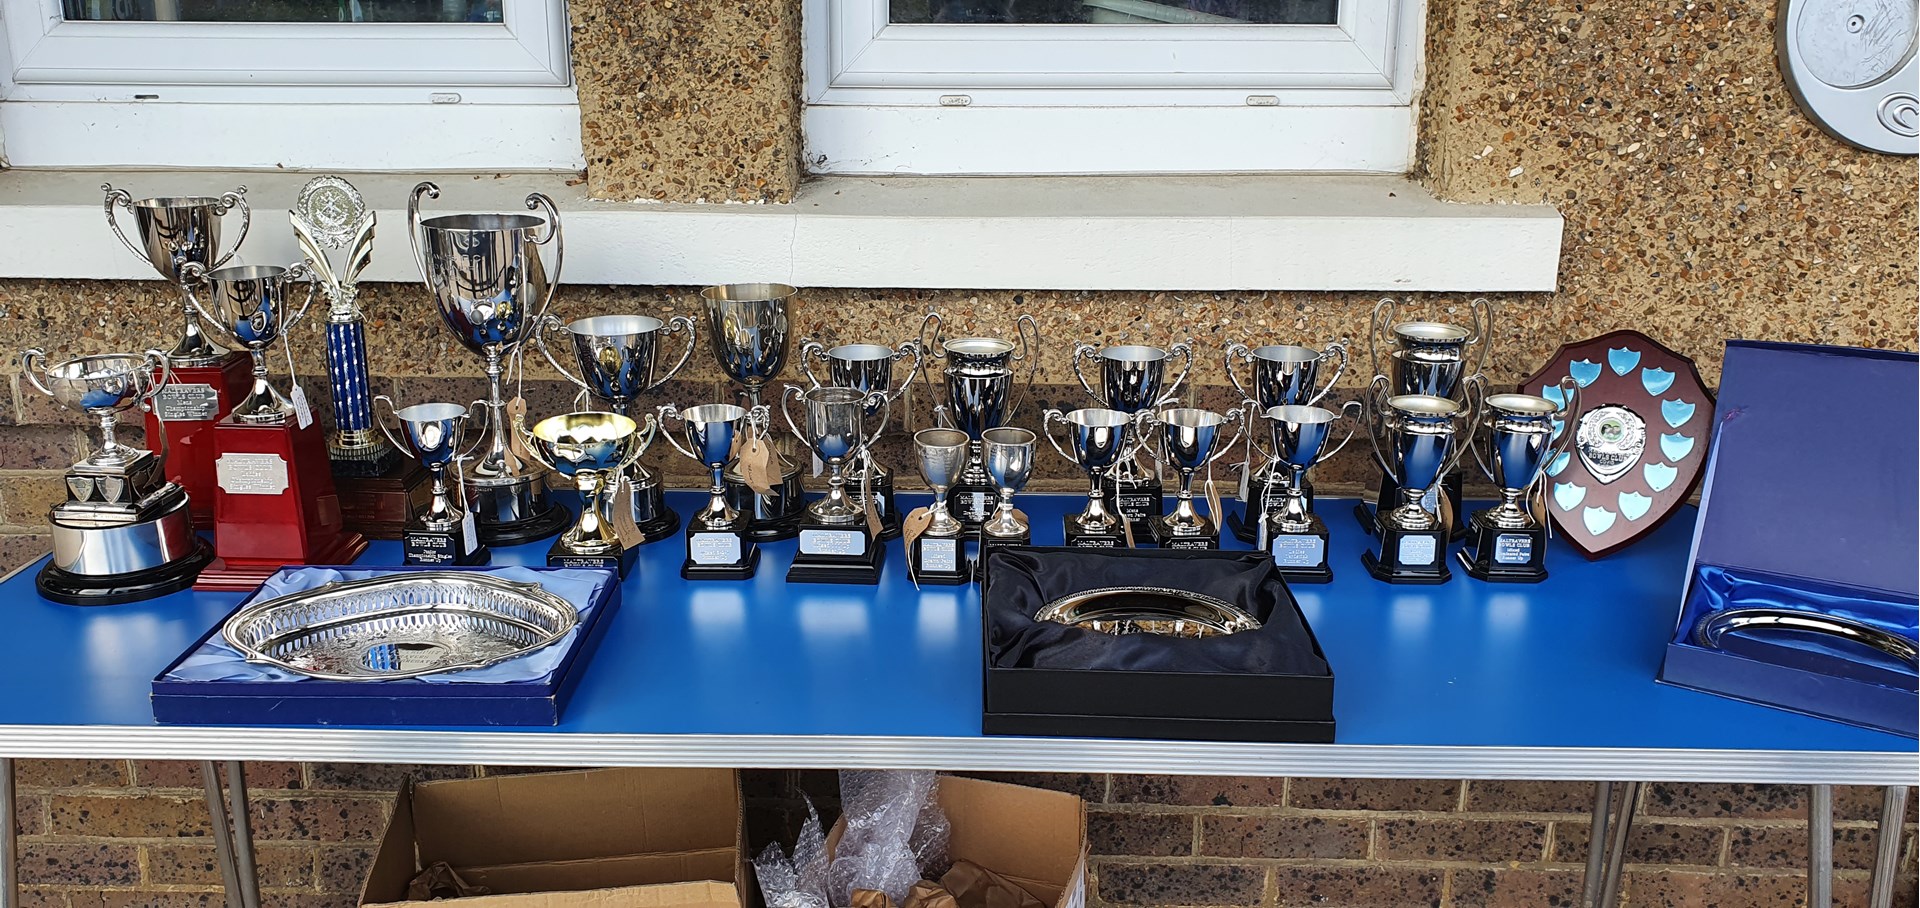 Array of Maltravers Trophies for Internal Competitions 2020